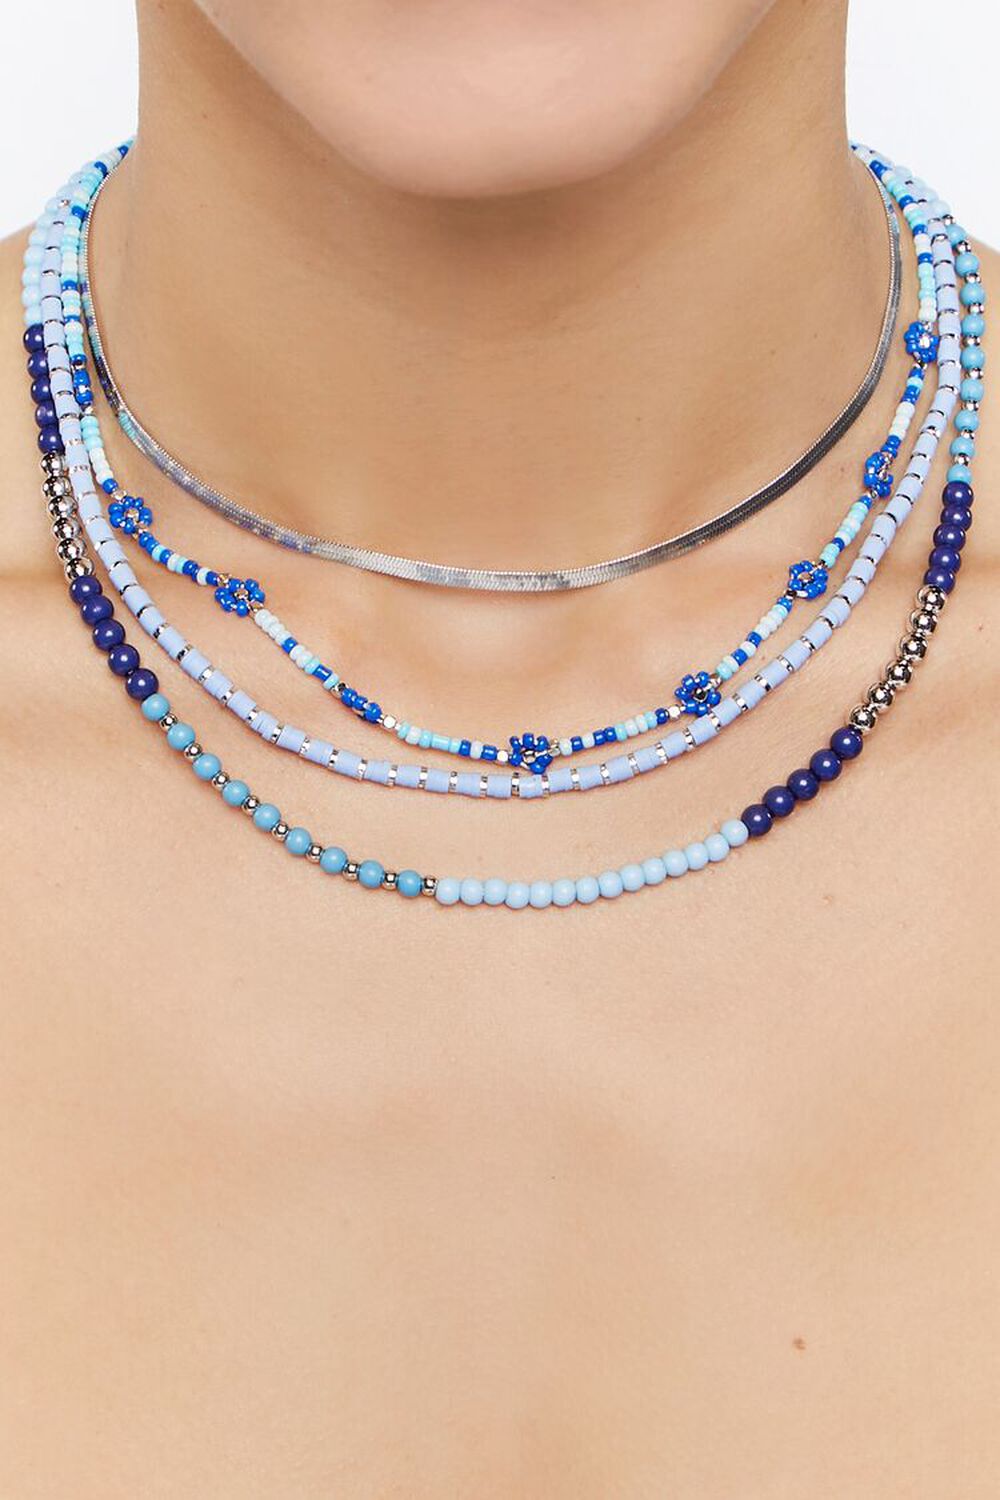 BLUE/SILVER Floral Beaded Layered Necklace Set, image 1